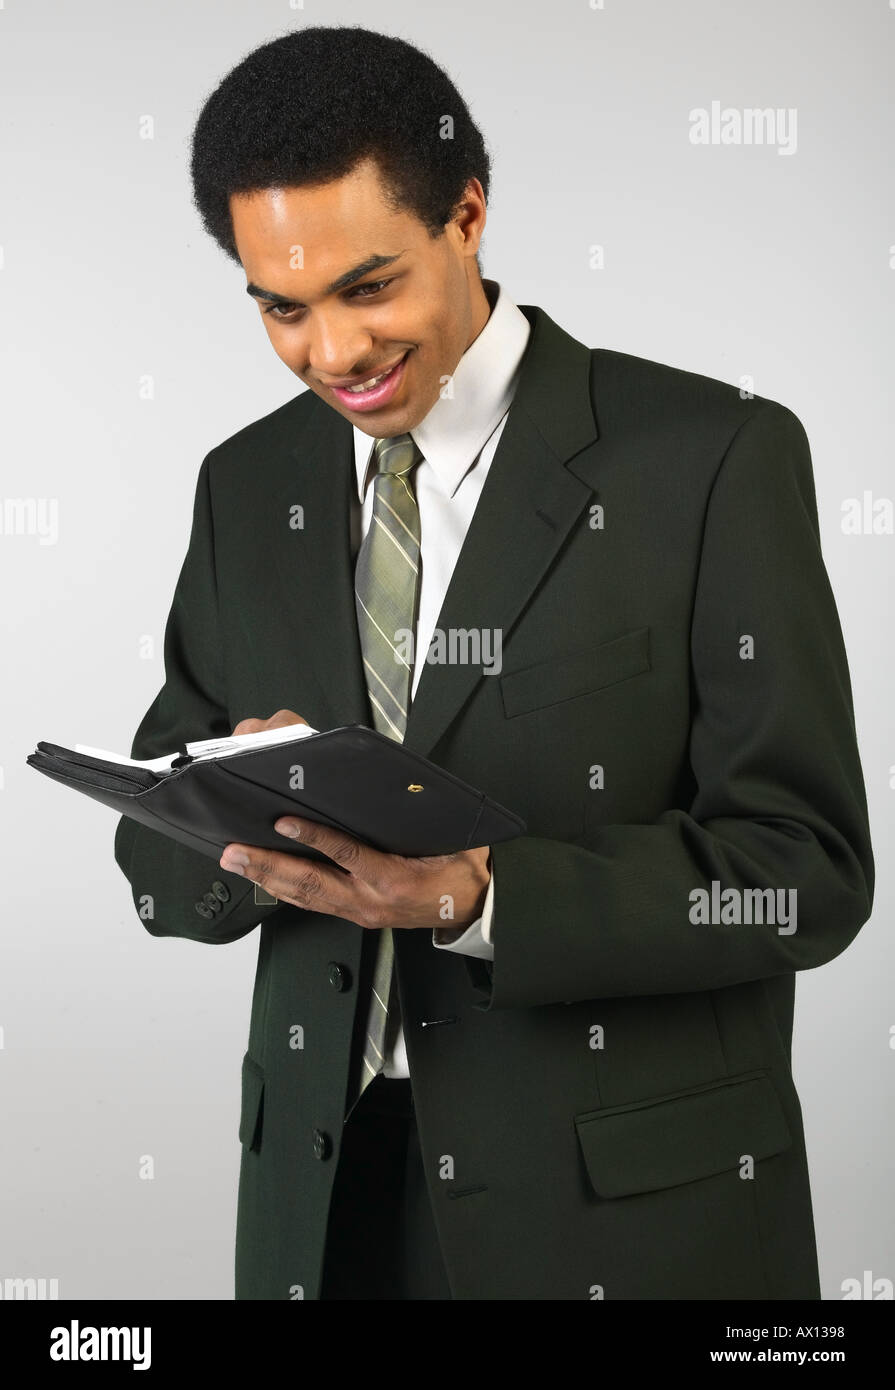 Smiling businessman writing in day planner uid 1459710 Stock Photo